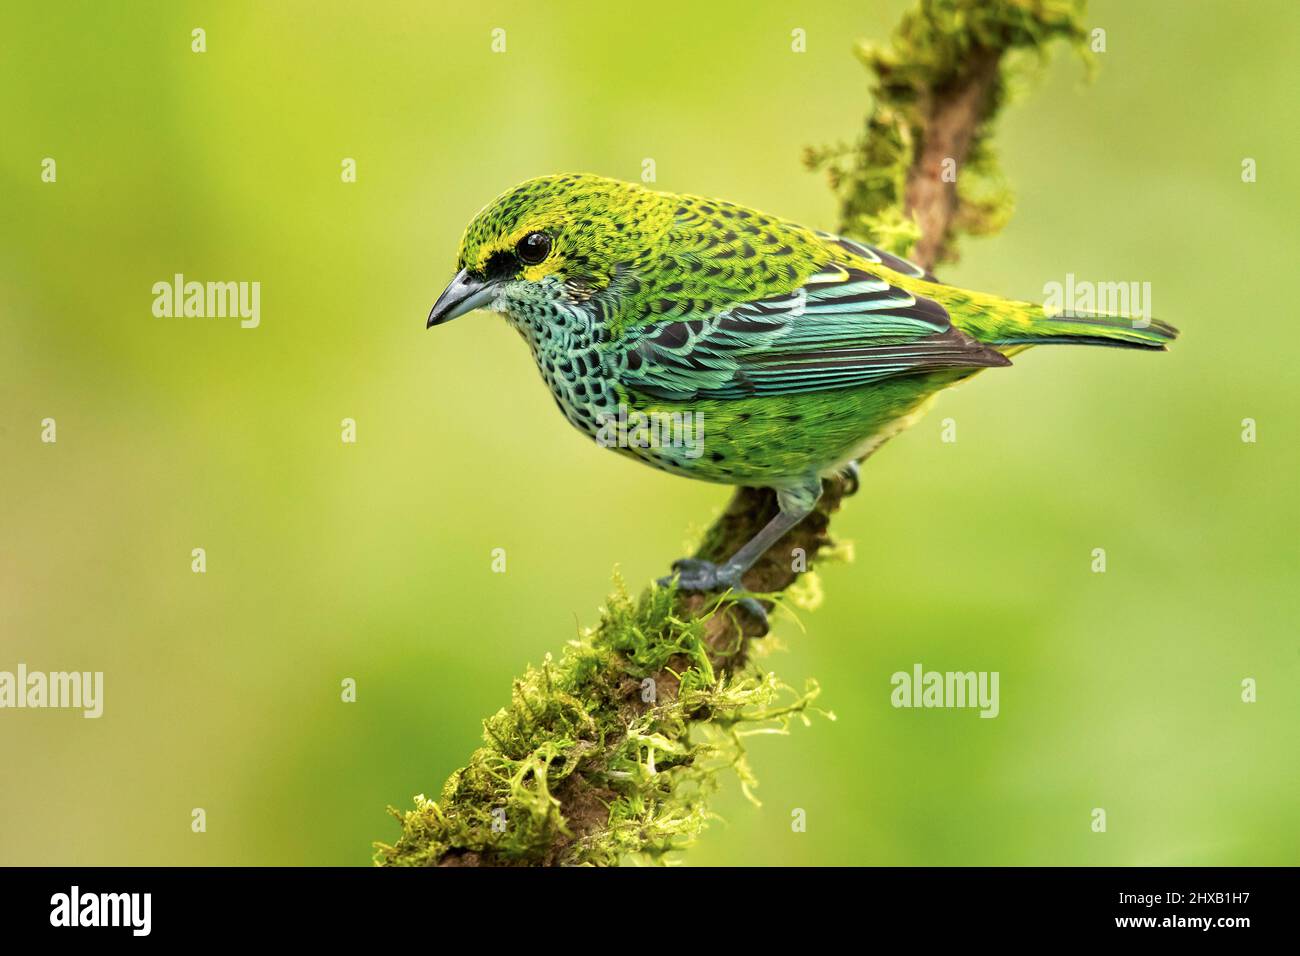 Speckled tanager Stock Photo